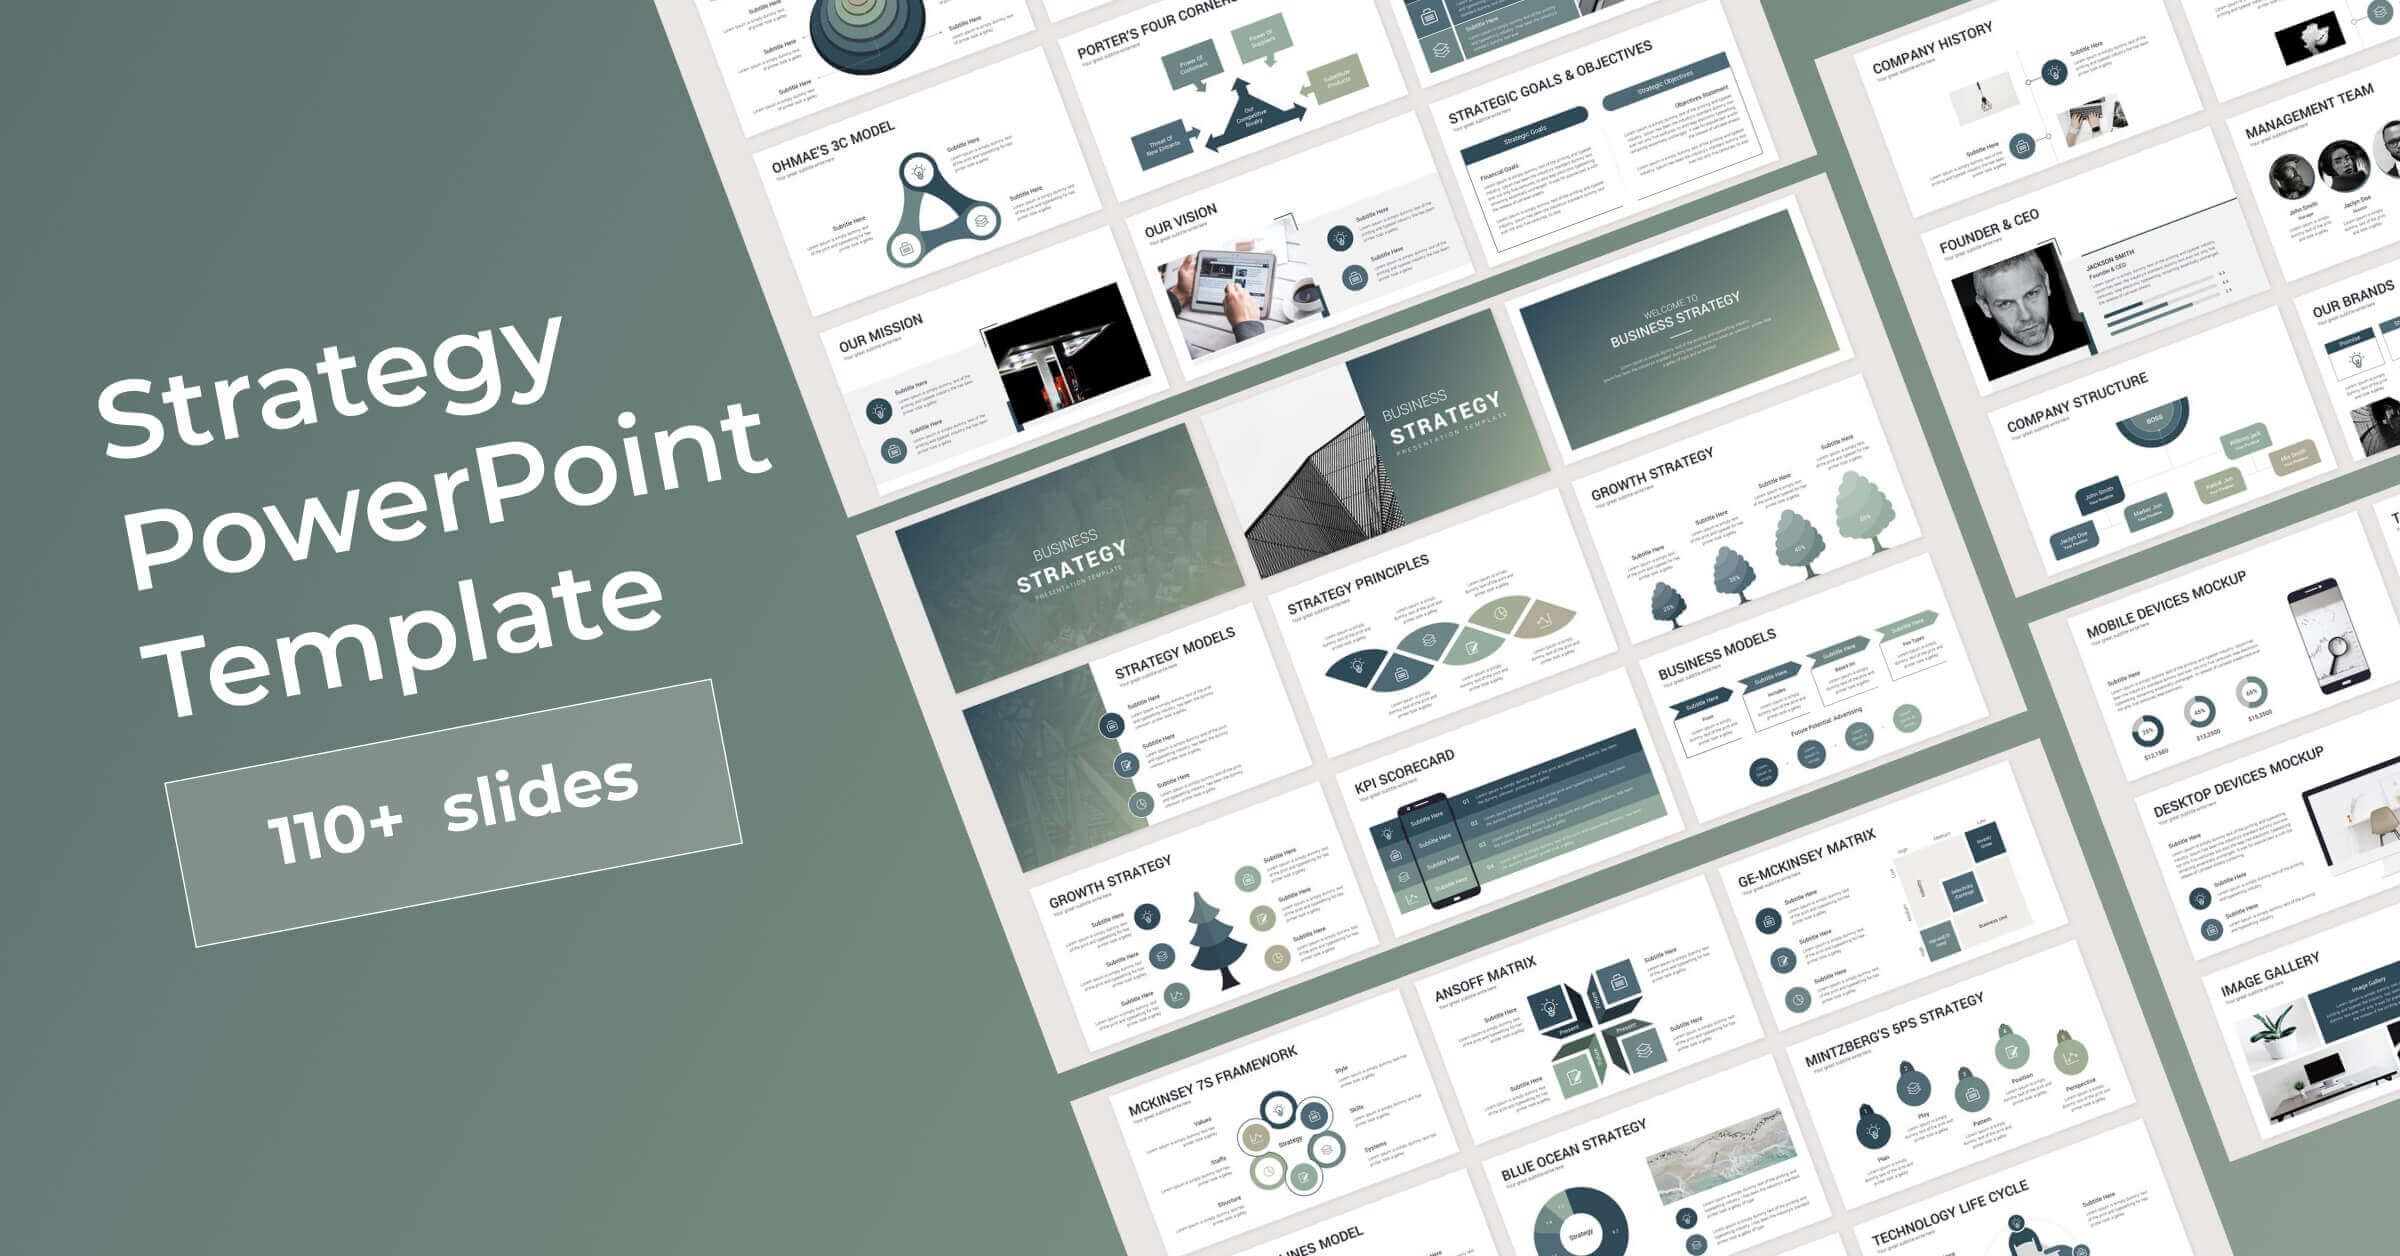 110 Plus Slides of Strategy Powerpoint Template on Grey Background.